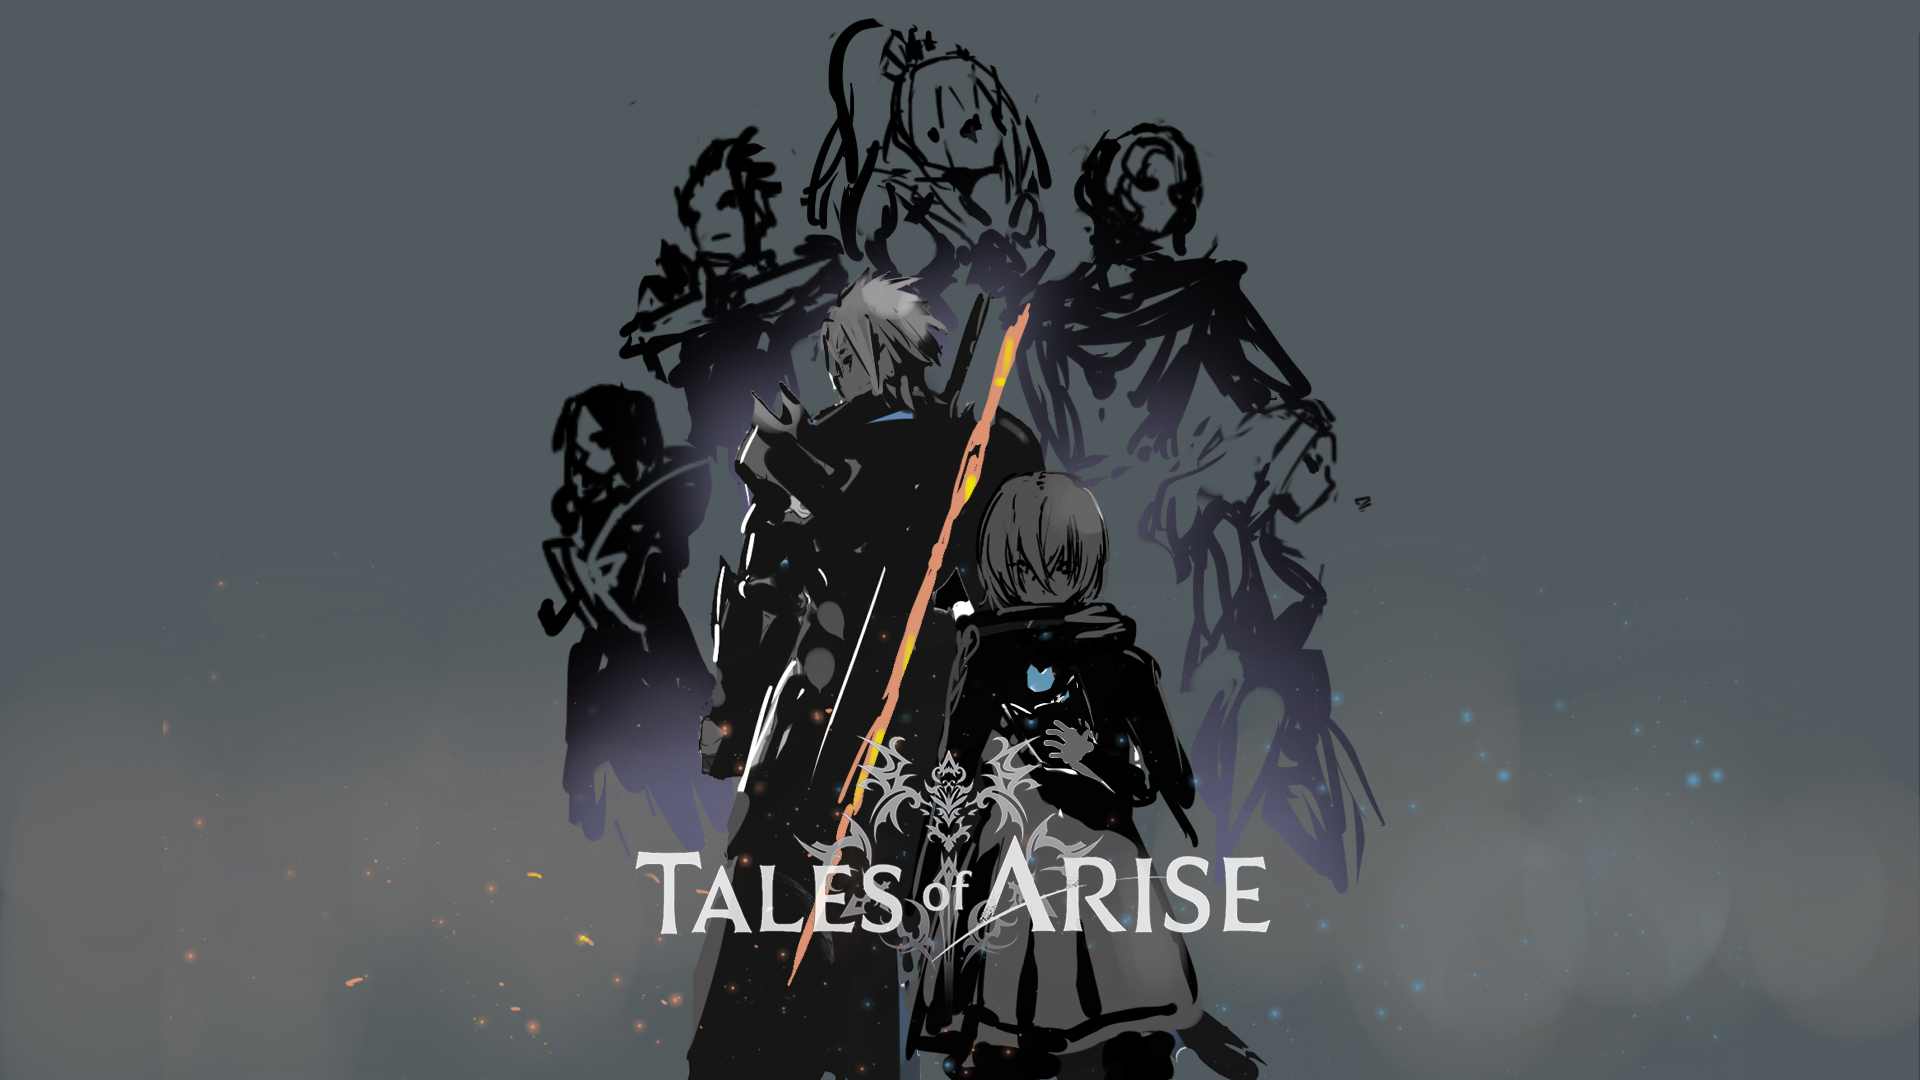 Tales of Arise Beyond the Dawn Reveals Additional Key Art Concept Illustrations